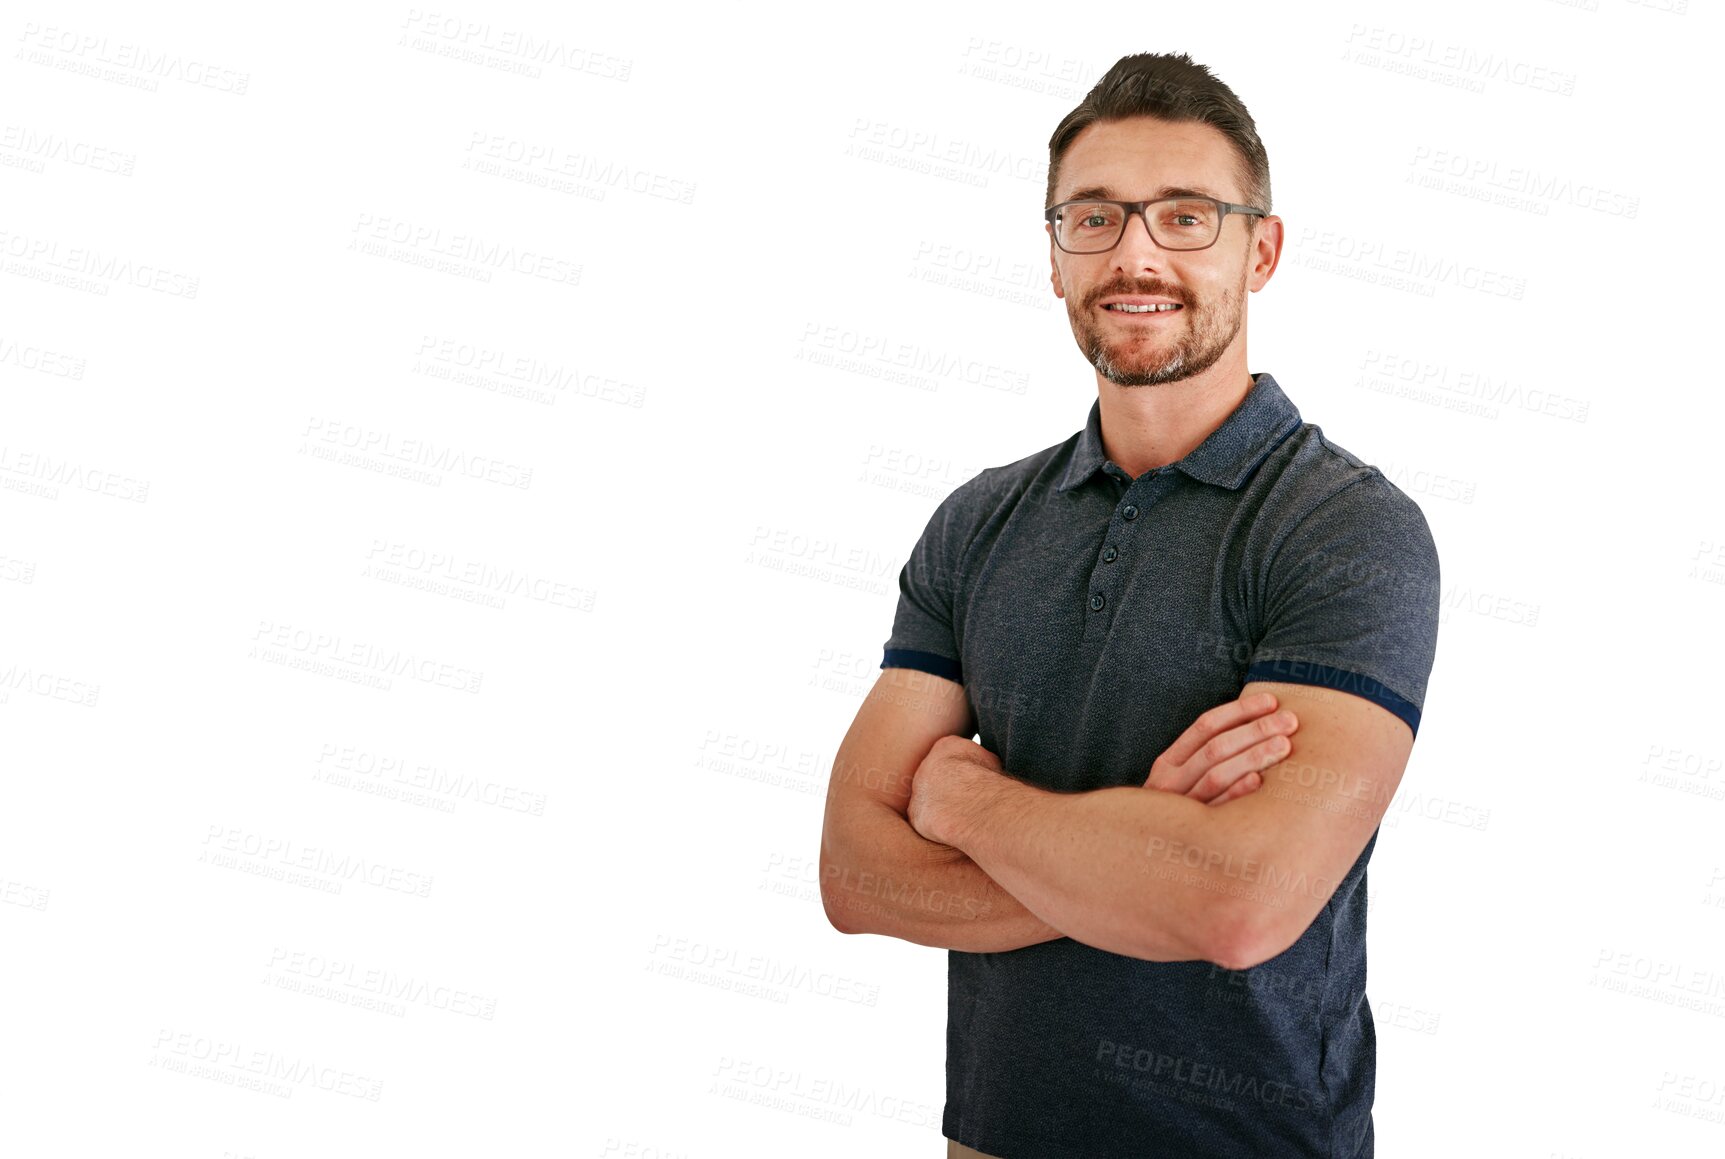 Buy stock photo Mature, man and entrepreneur in confidence with smile for small business, professional and start up on png transparent background. Businessman, portrait and happy for growth and opportunities. 